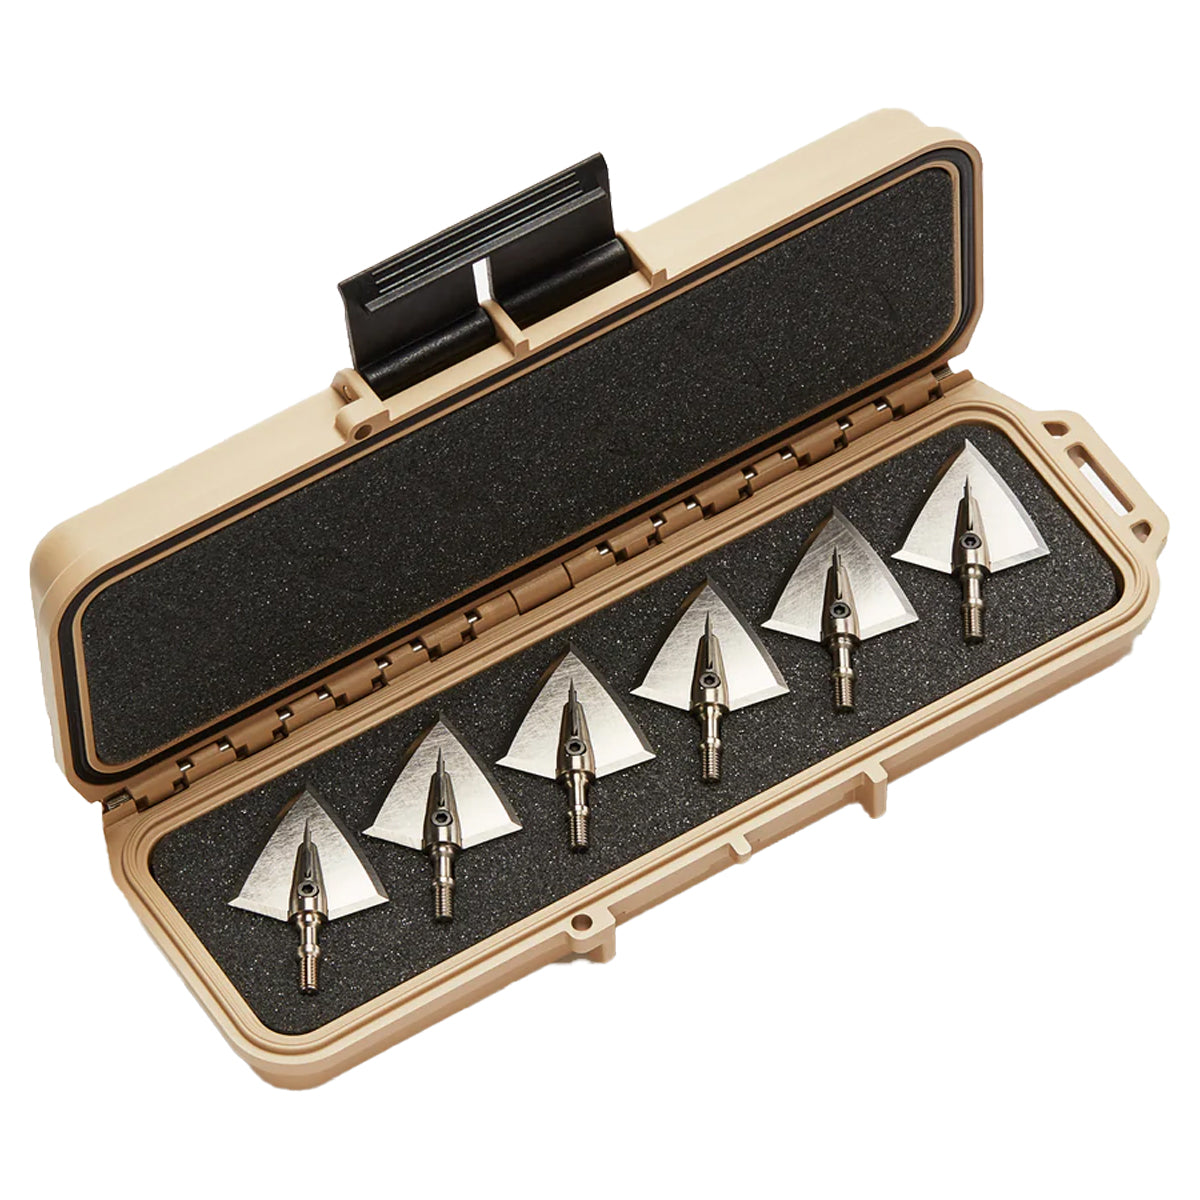 Day Six Gear Evo 150 Grain Broadheads - 6 Pack with SKB Hard Case in  by GOHUNT | Day Six - GOHUNT Shop